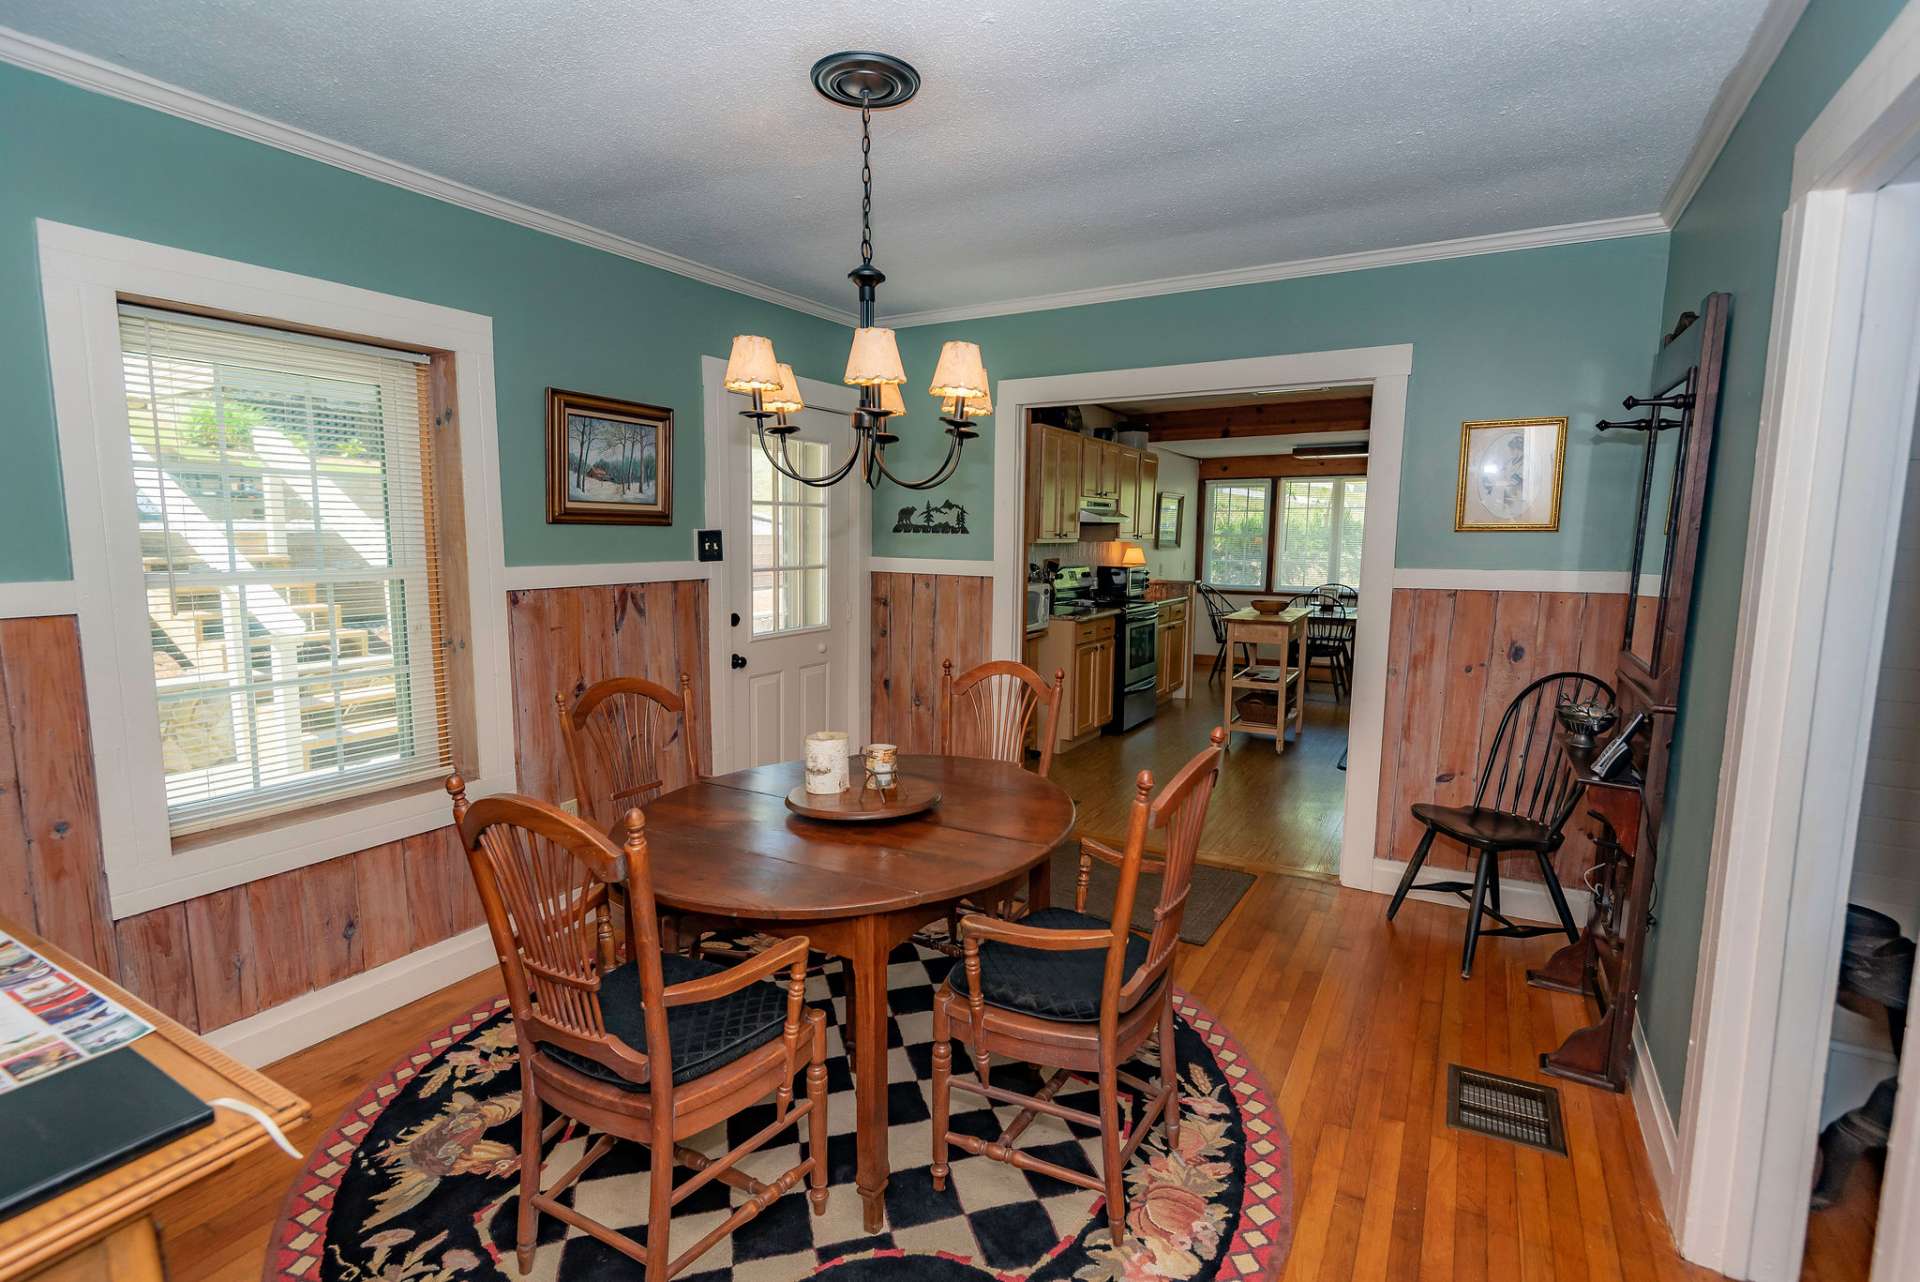 There is a formal dining room for entertaining dinner guests or a quiet candlelight dinner for two.